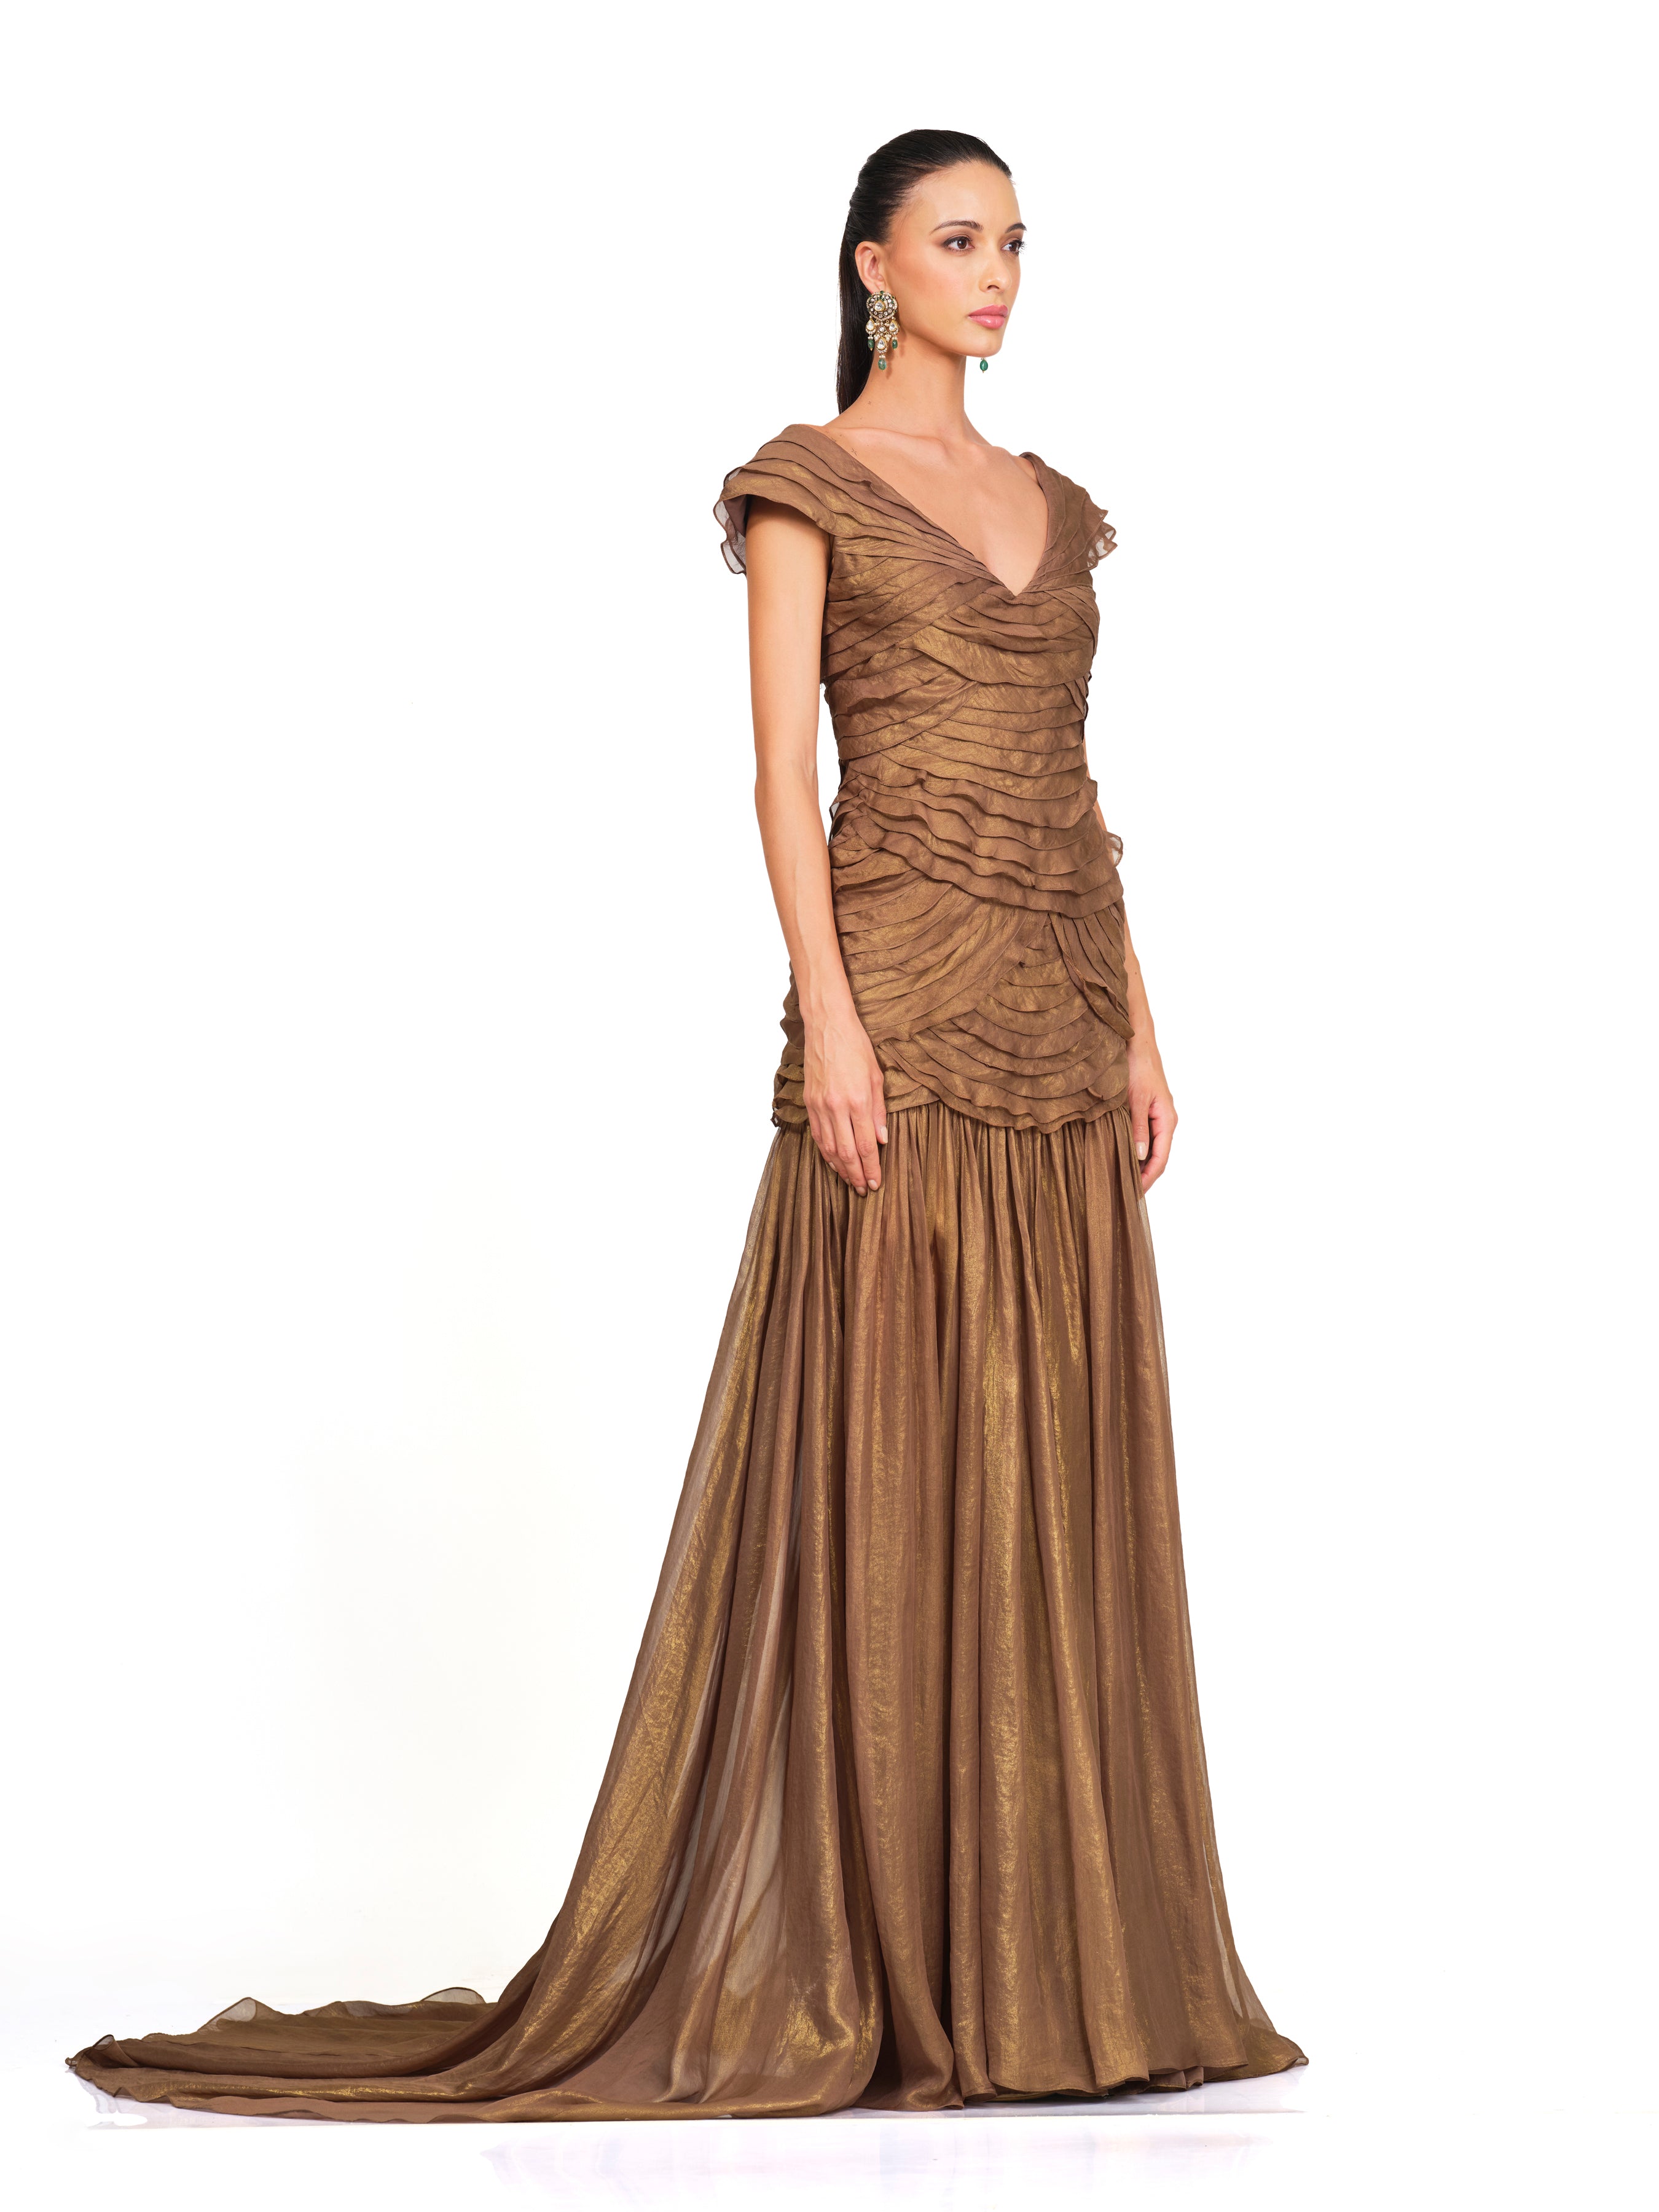 Metallic Gown With High Slit